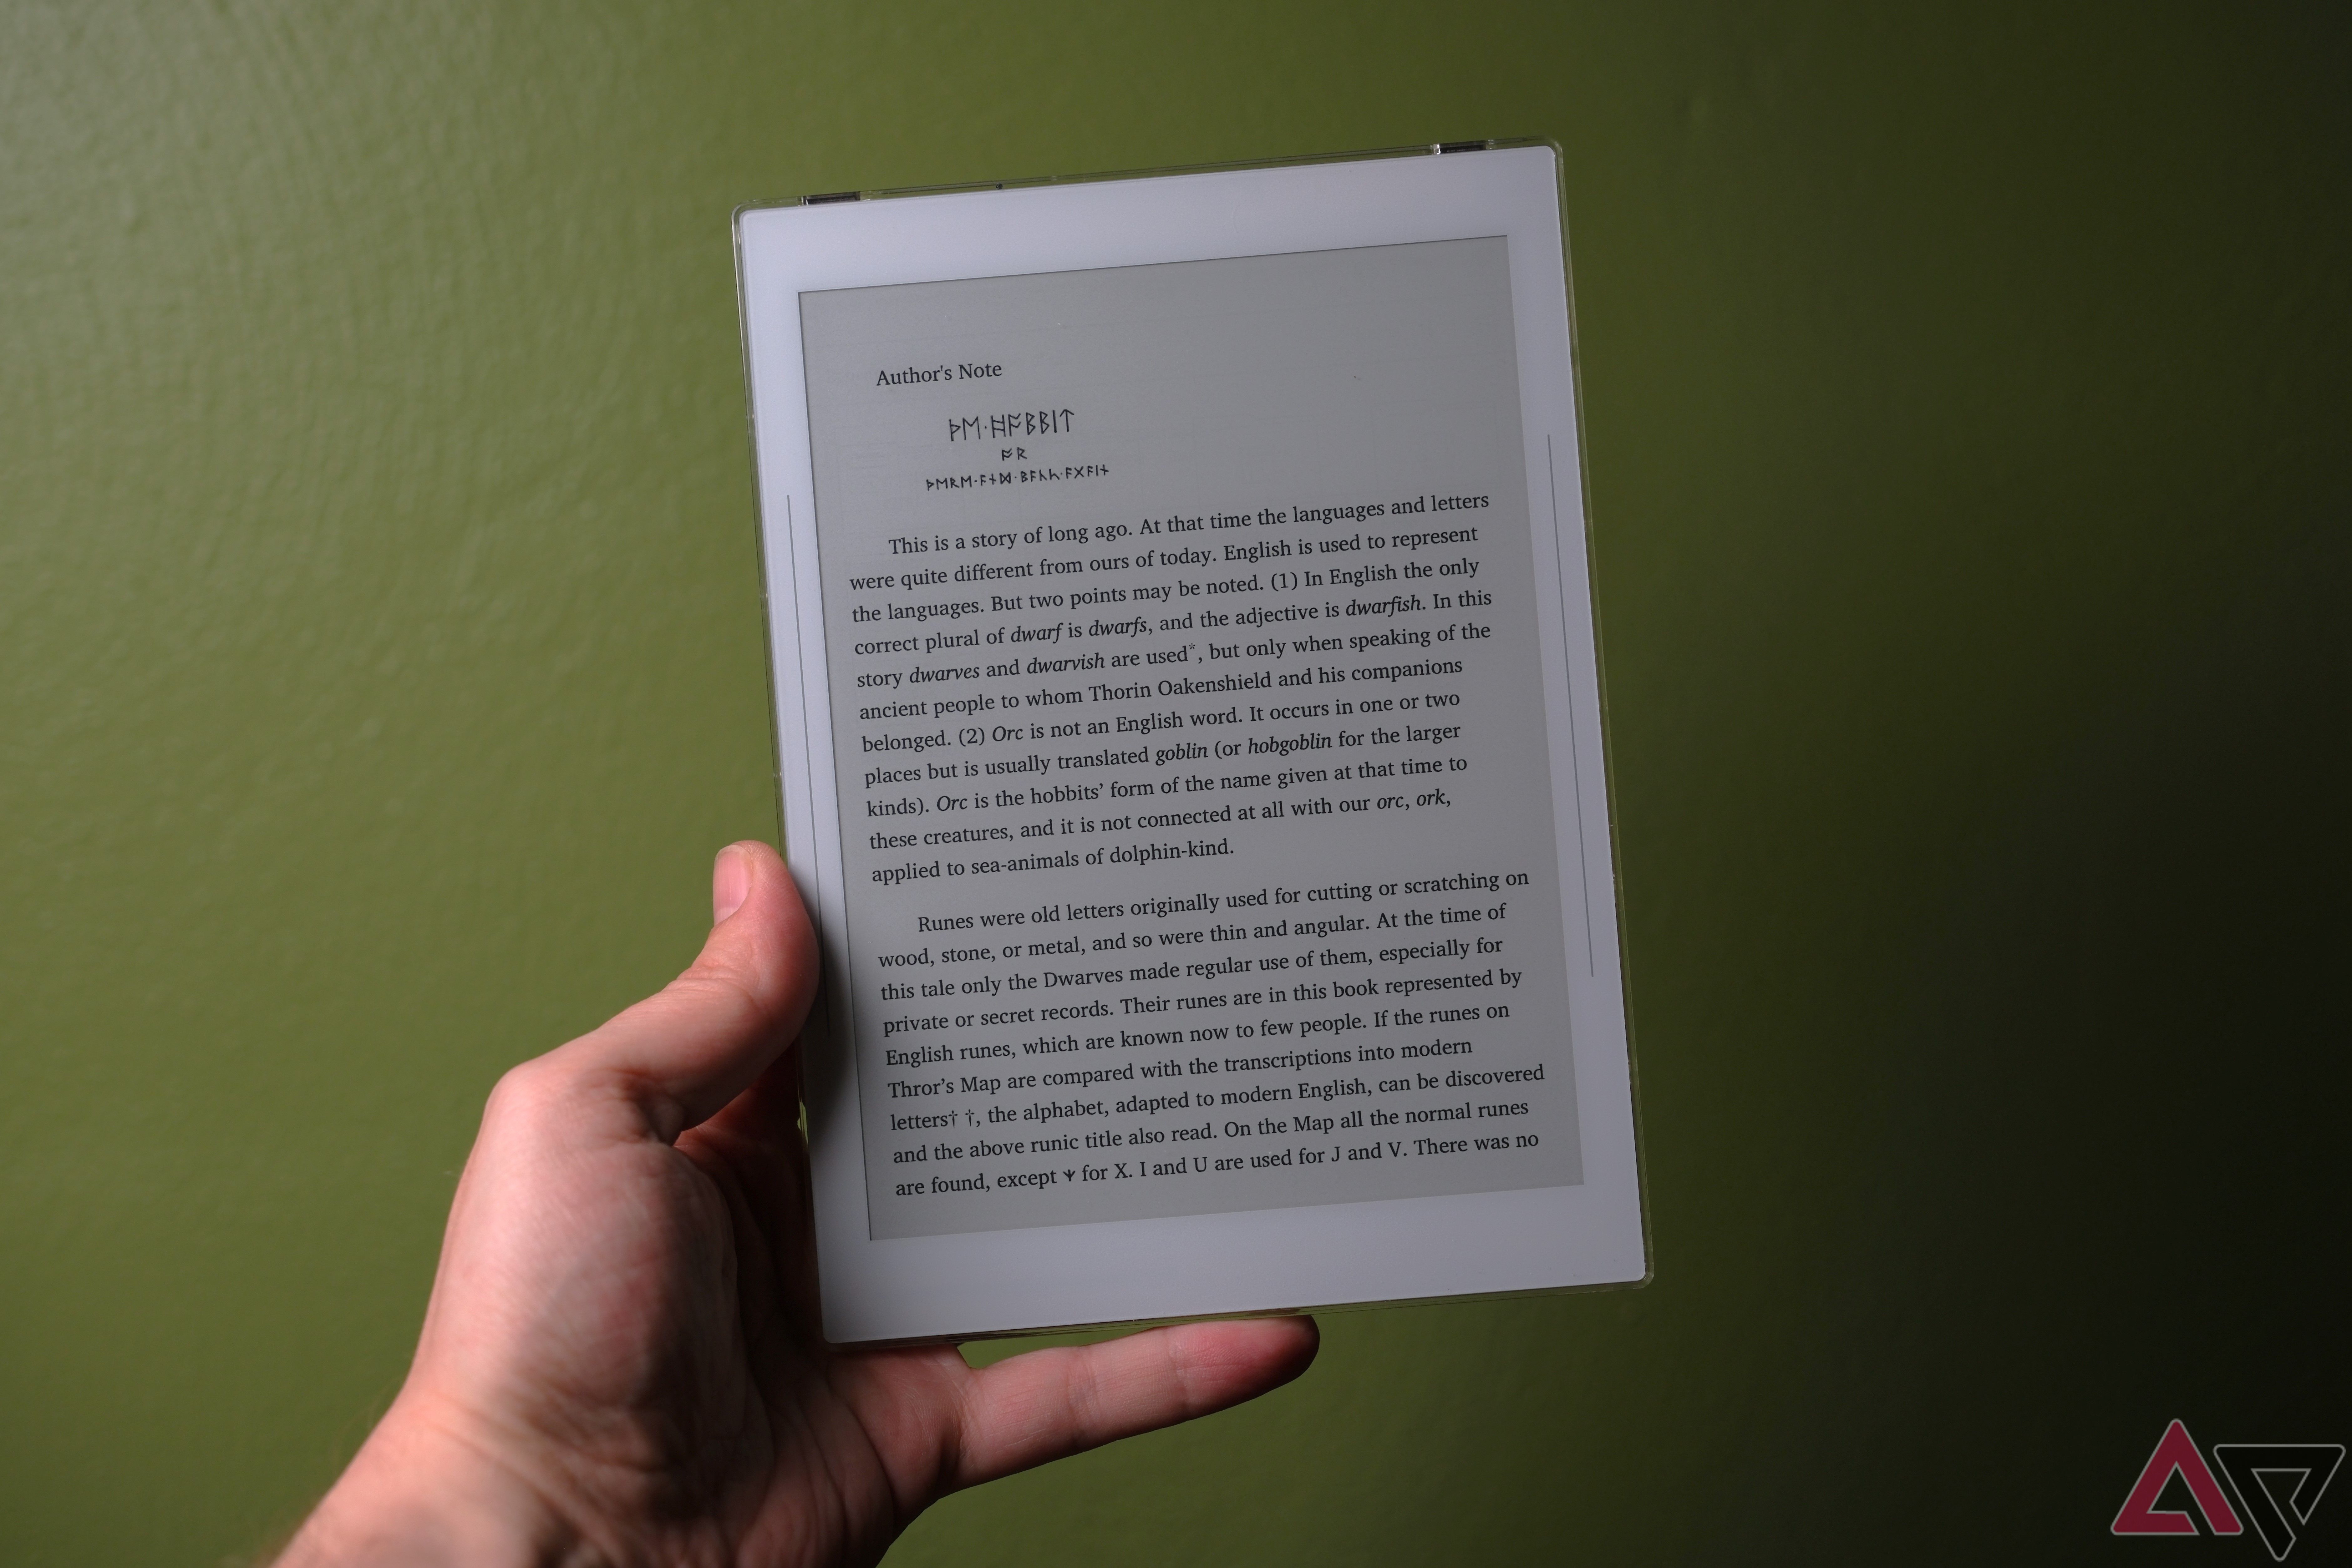 Supernote Nomad held in hand showing epub on screen with green background